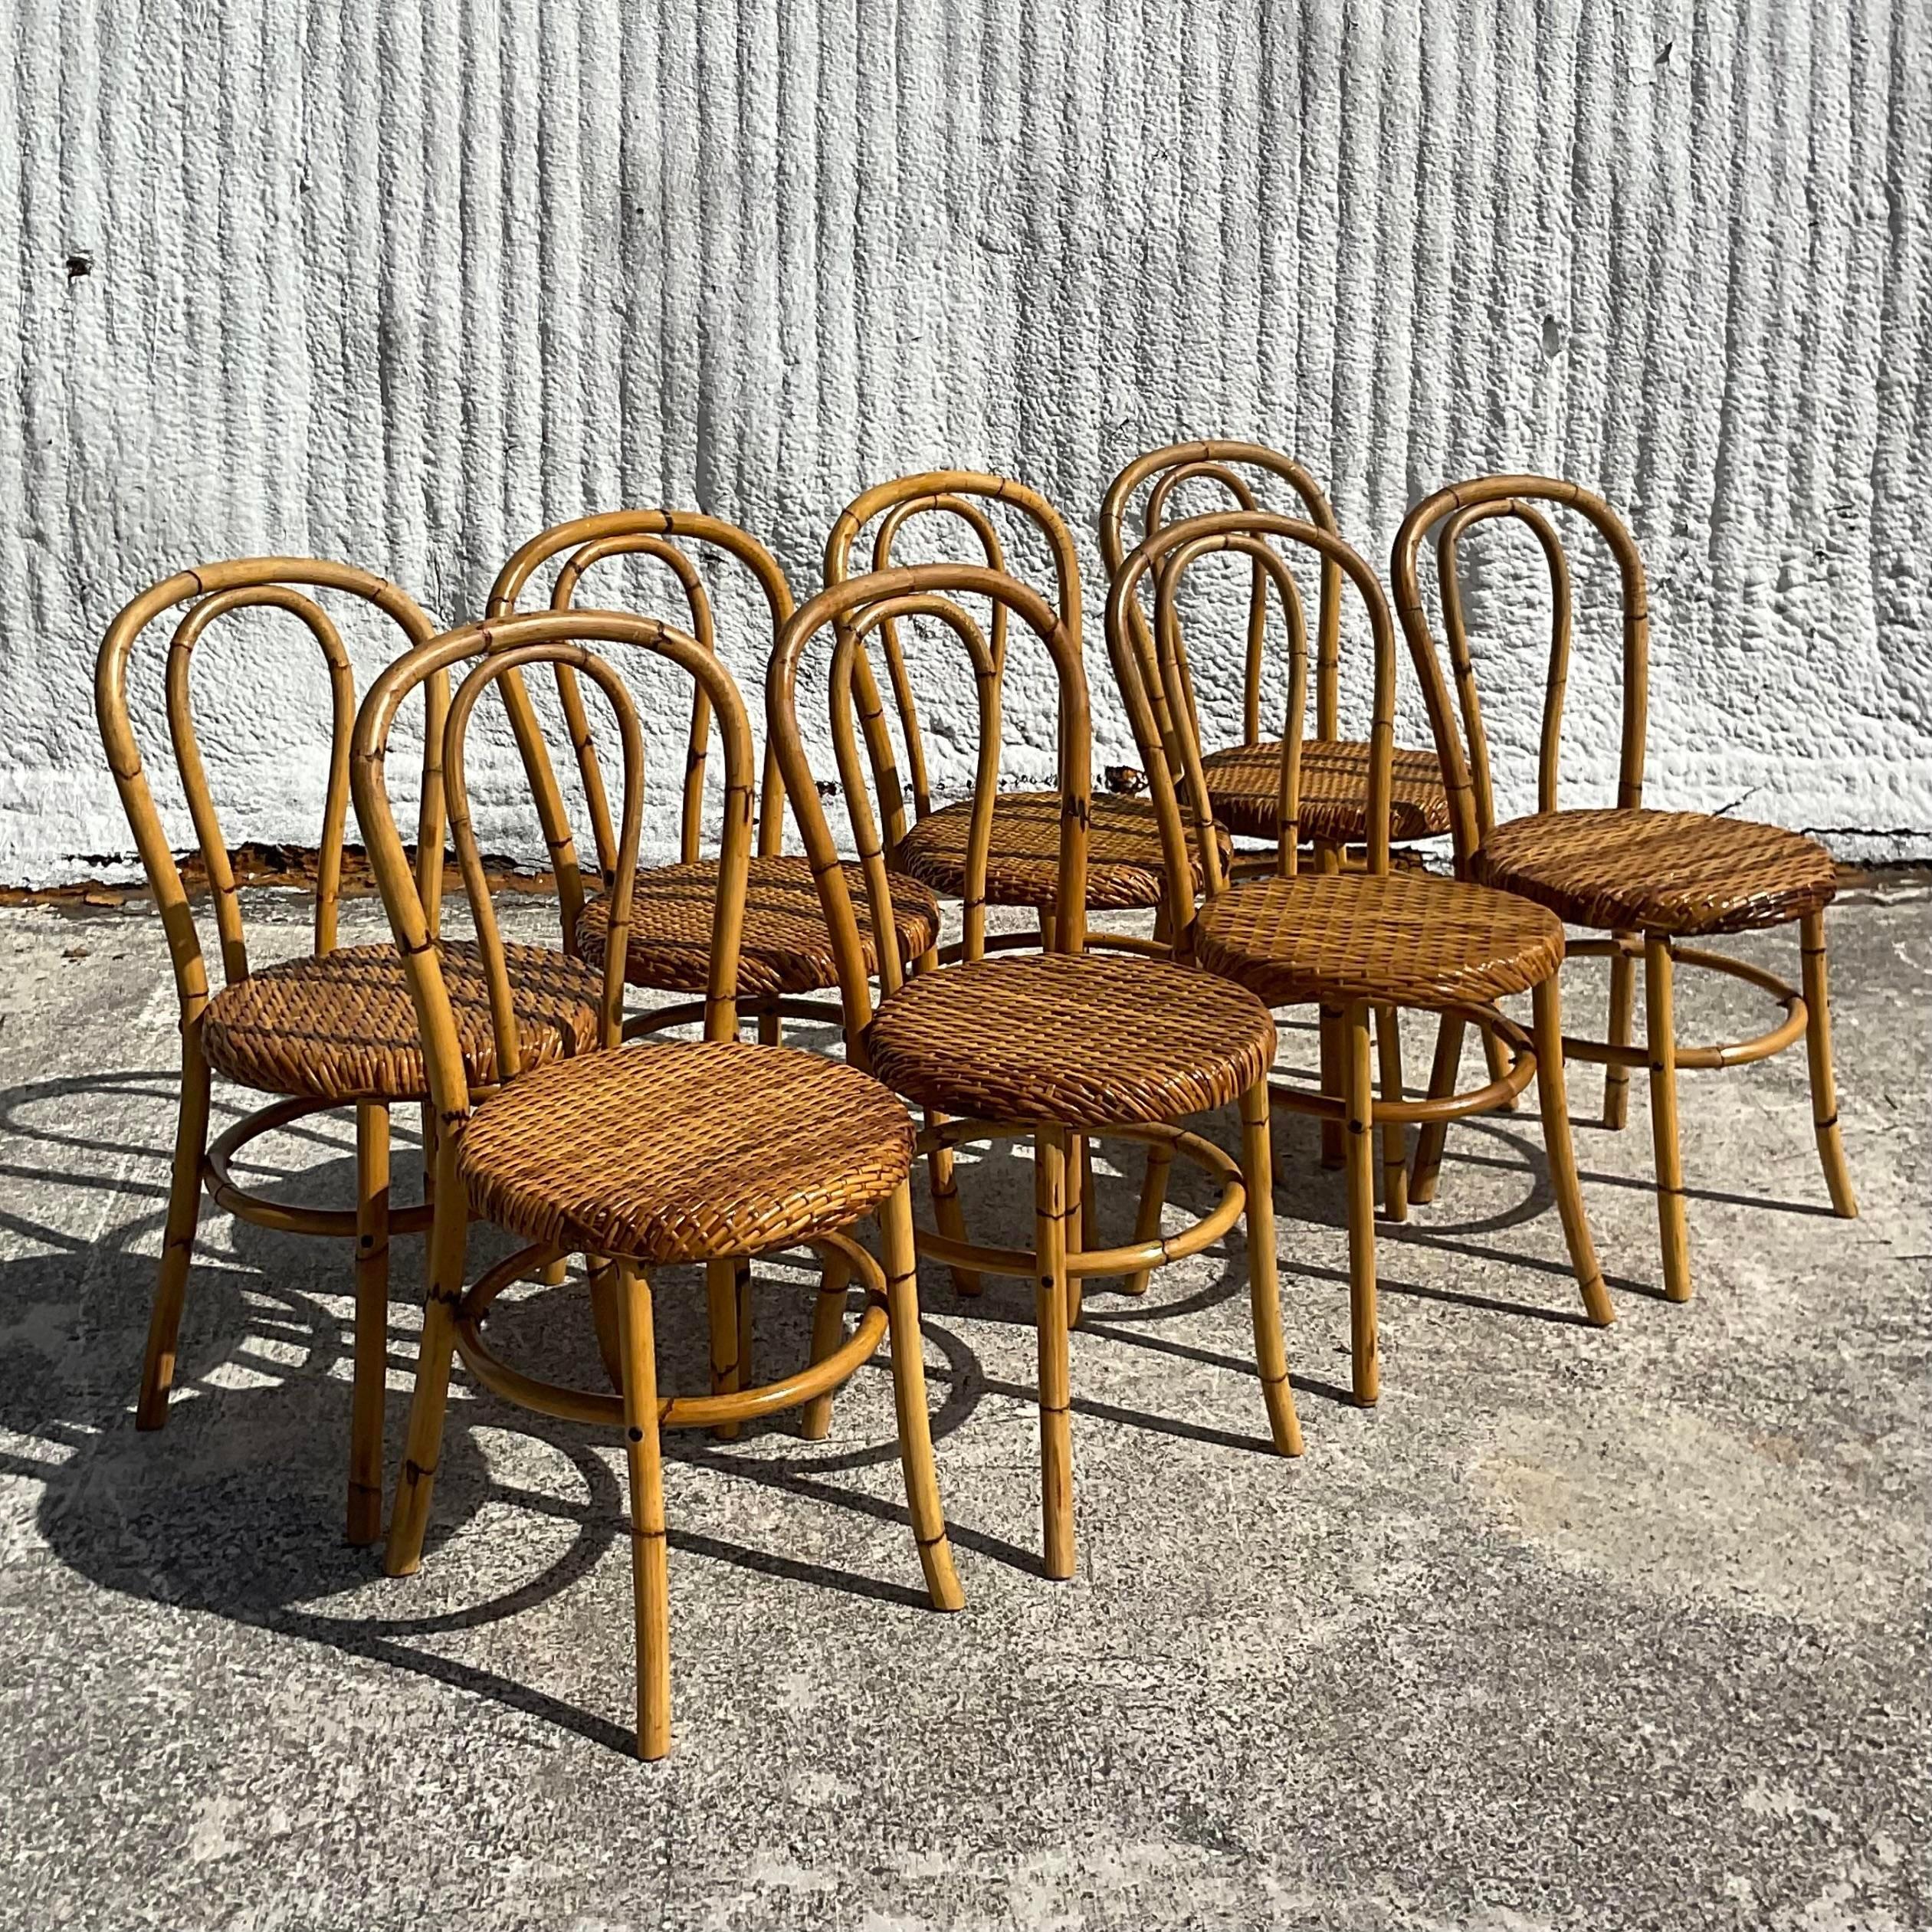 Philippine Vintage Coastal Rare McGuire Bent Bamboo Dining Chairs - Set of 8 For Sale